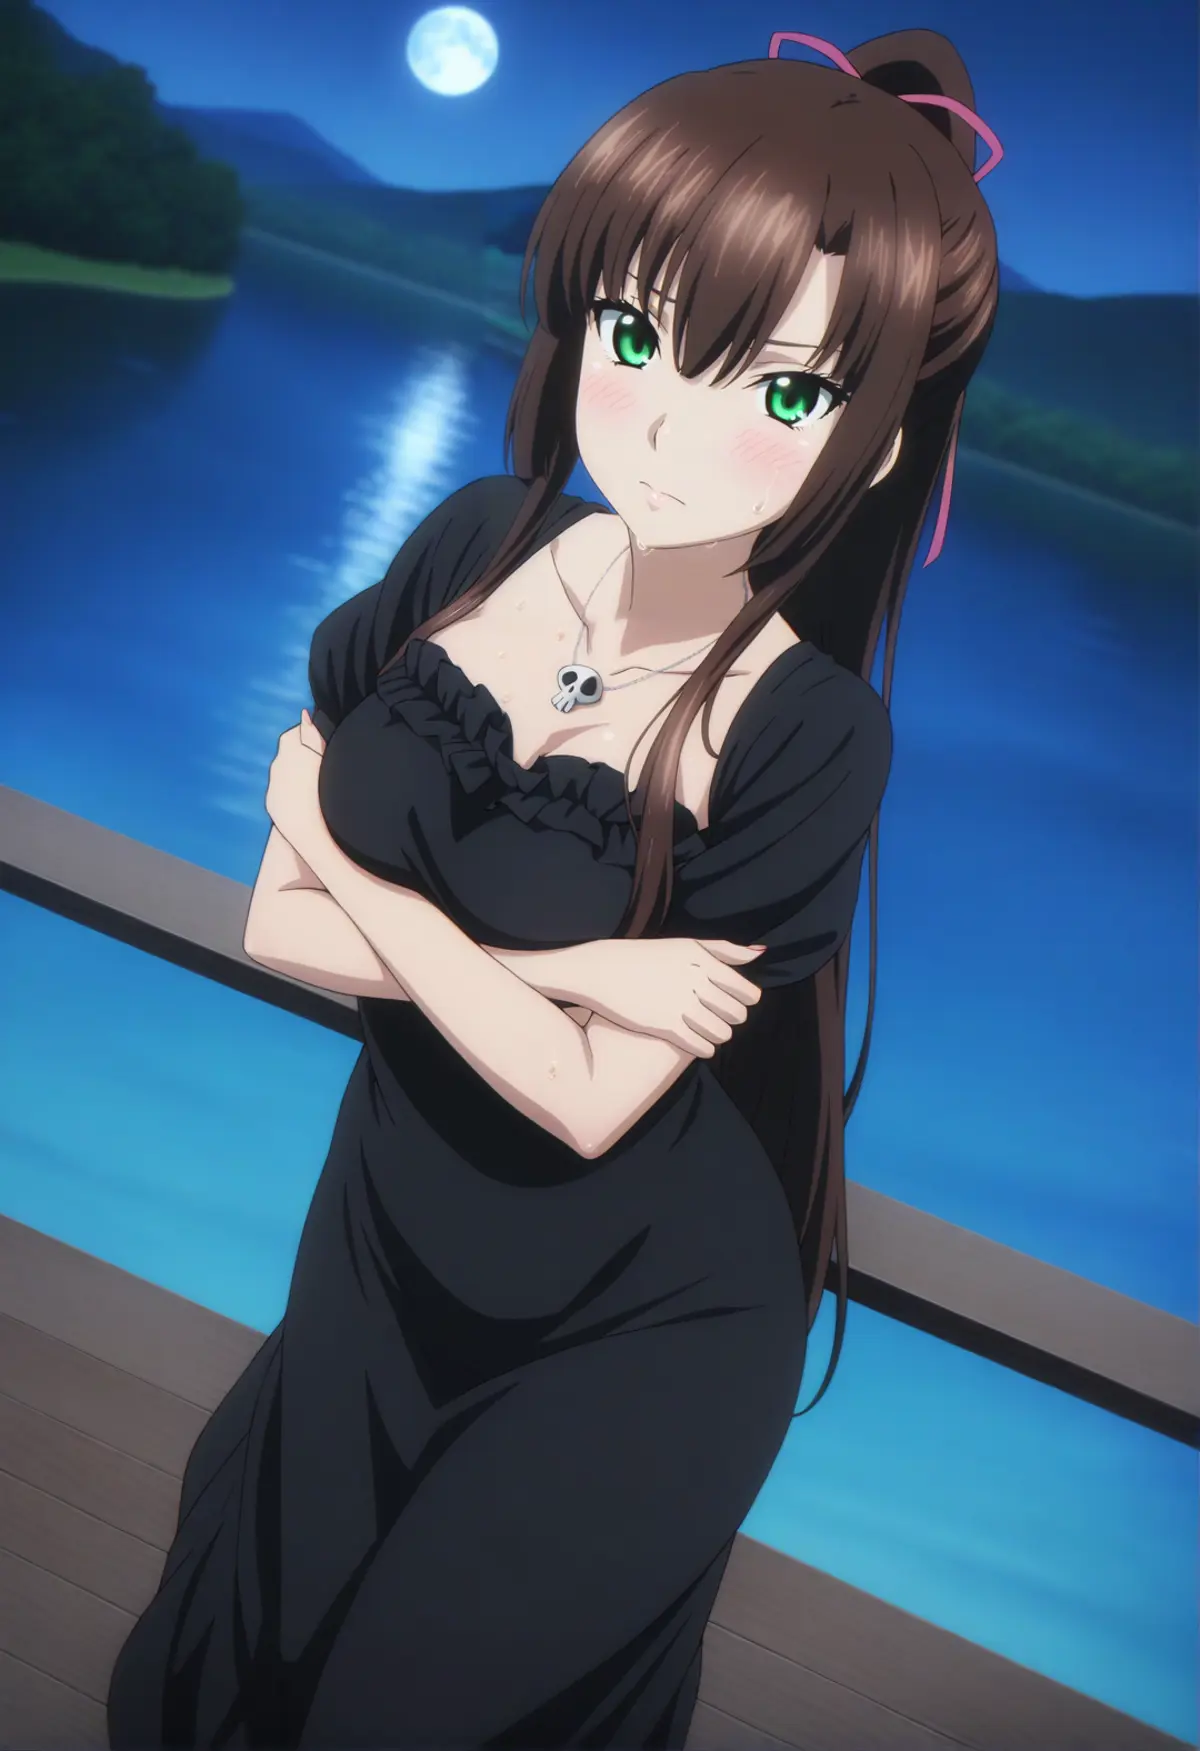 A young woman leaning on a railing overlooking a body of water at night with her arms are crossed in front of her. She is wearing a black dress with short sleeves and has long hair tied back with a ribbon. A necklace with a skull pendant adorns the neck. 